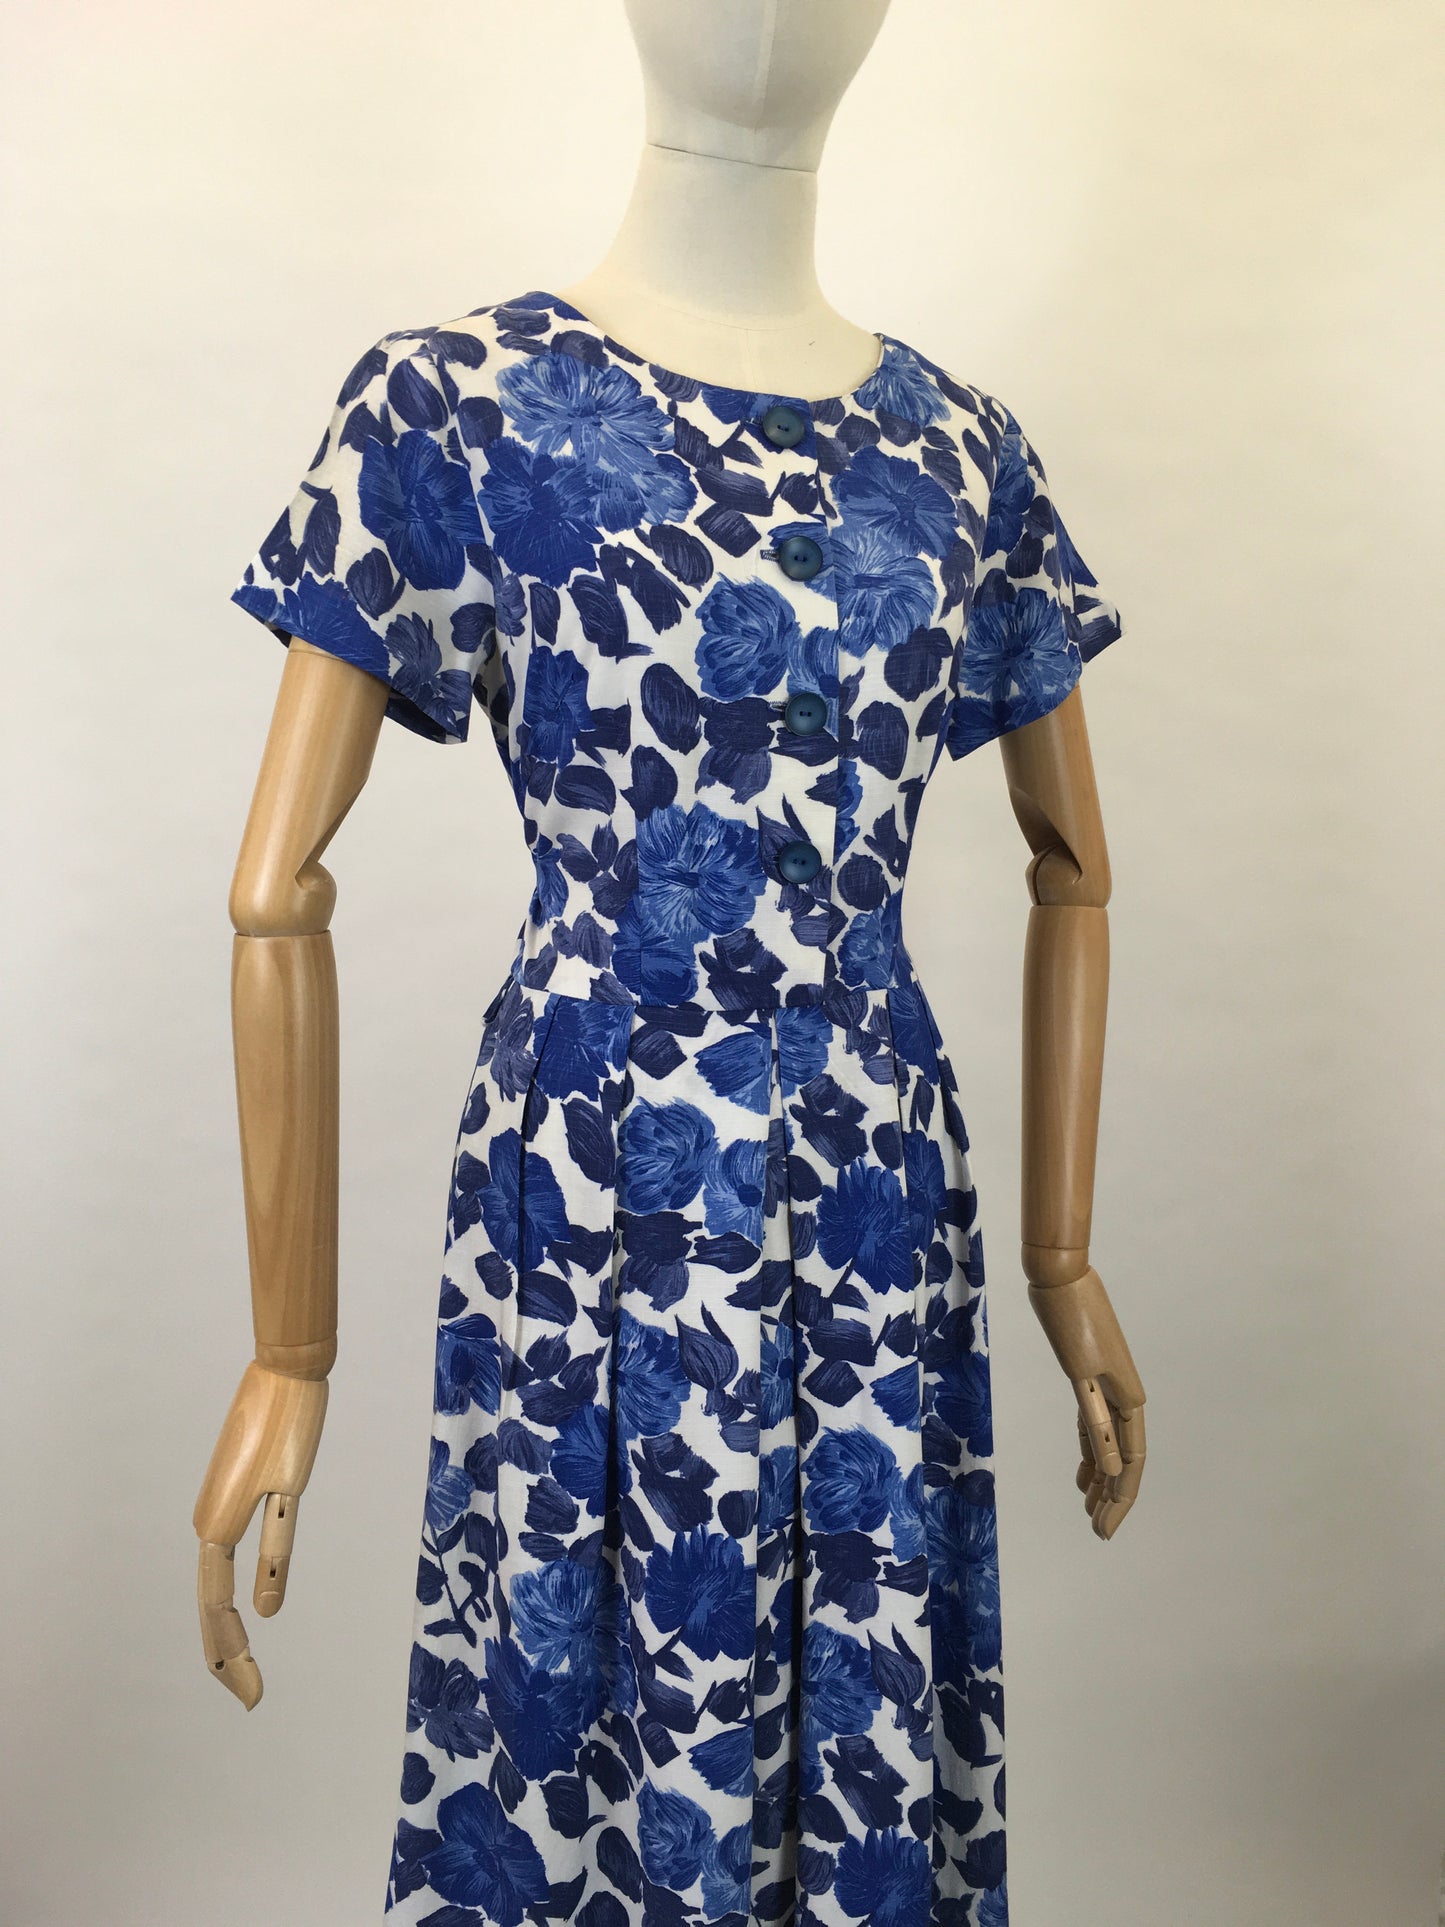 Original 1950’s Darling Floral Cotton Day Dress - Made by ‘ St. Michael ‘